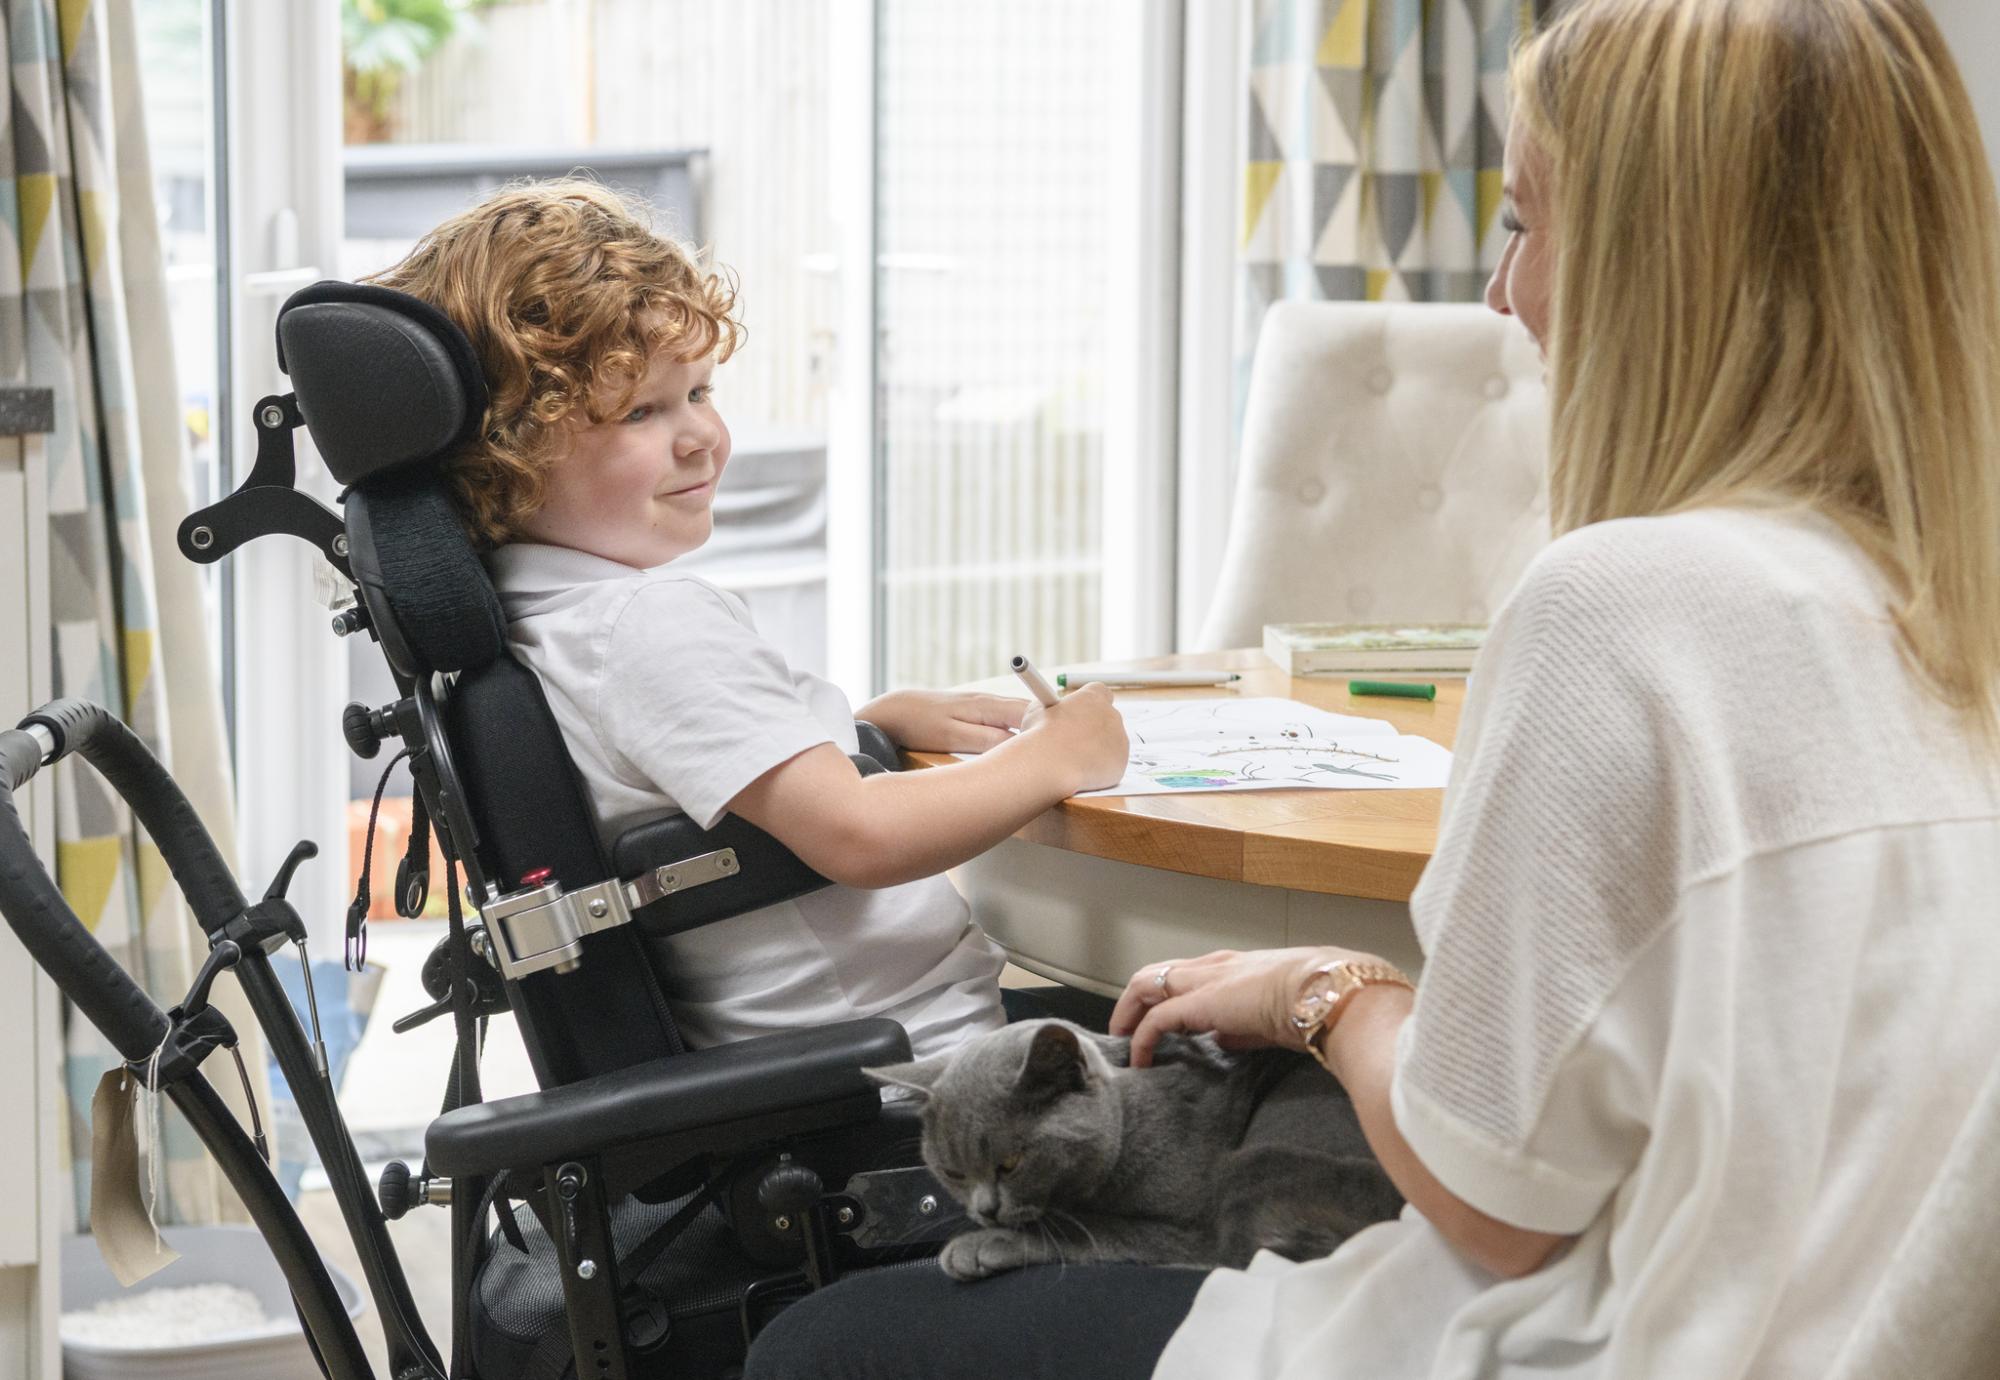 Disabled child receiving support from a family member